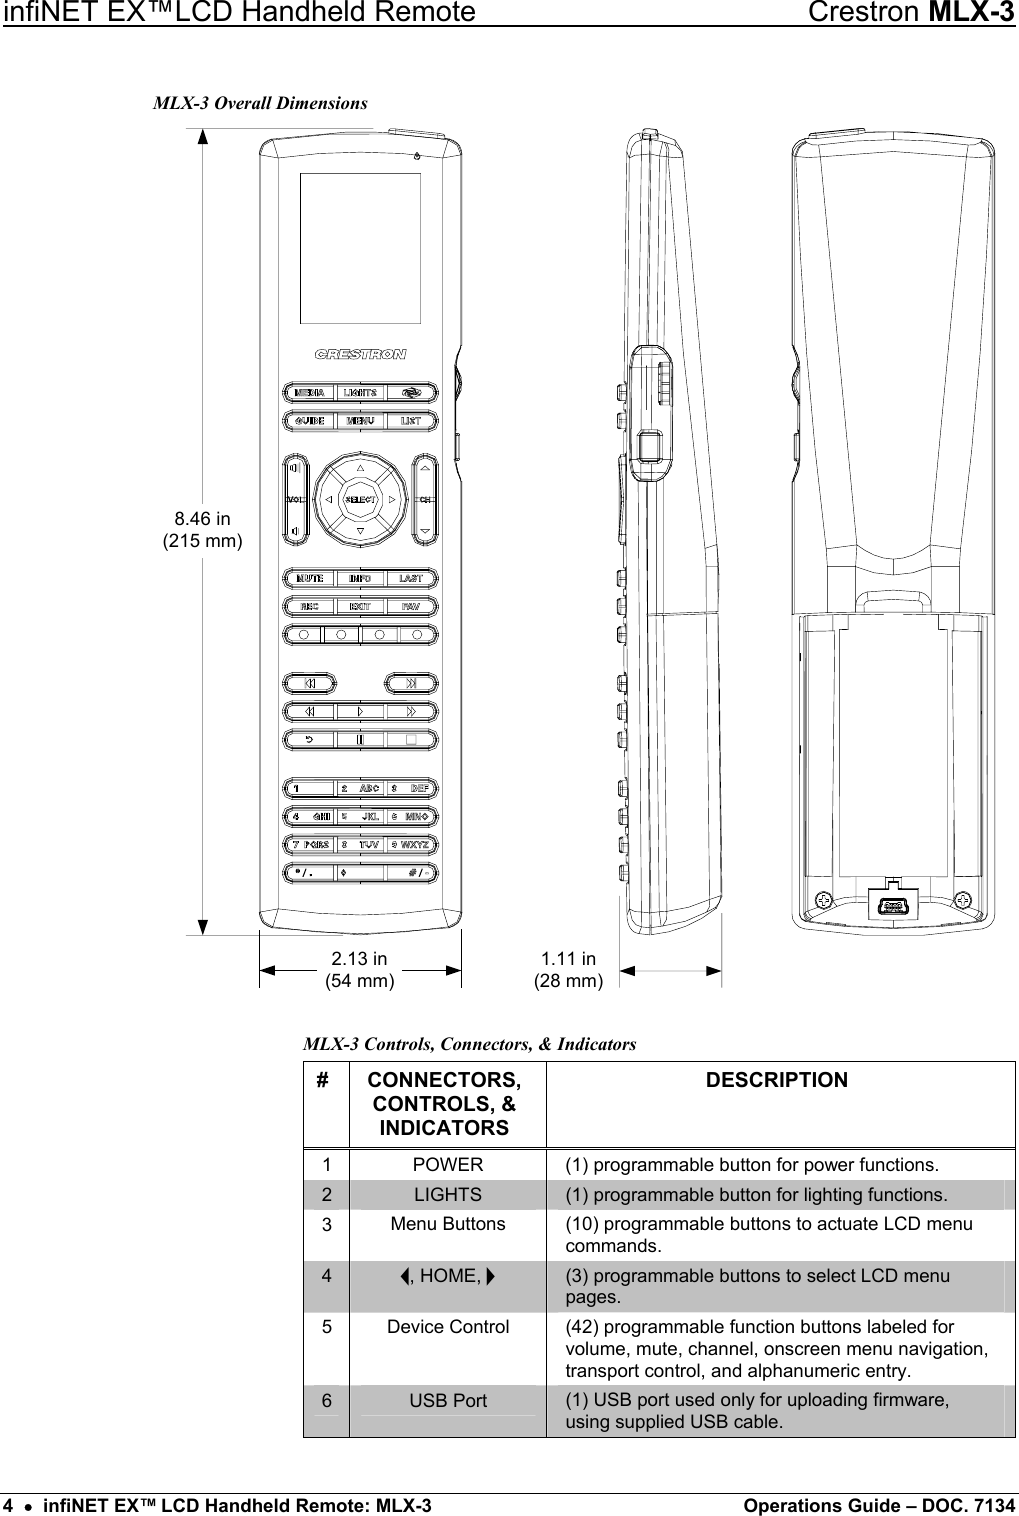 infiNET EX™LCD Handheld Remote  Crestron MLX-3 MLX-3 Overall Dimensions 8.46 in(215 mm)2.13 in(54 mm)1.11 in(28 mm)  MLX-3 Controls, Connectors, &amp; Indicators # CONNECTORS, CONTROLS, &amp; INDICATORS DESCRIPTION 1  POWER  (1) programmable button for power functions. 2  LIGHTS  (1) programmable button for lighting functions. 3  Menu Buttons  (10) programmable buttons to actuate LCD menu commands. 4  i, HOME, h (3) programmable buttons to select LCD menu pages. 5 Device Control (42) programmable function buttons labeled for volume, mute, channel, onscreen menu navigation, transport control, and alphanumeric entry. 6  USB Port  (1) USB port used only for uploading firmware, using supplied USB cable. 4  •  infiNET EX™ LCD Handheld Remote: MLX-3  Operations Guide – DOC. 7134 